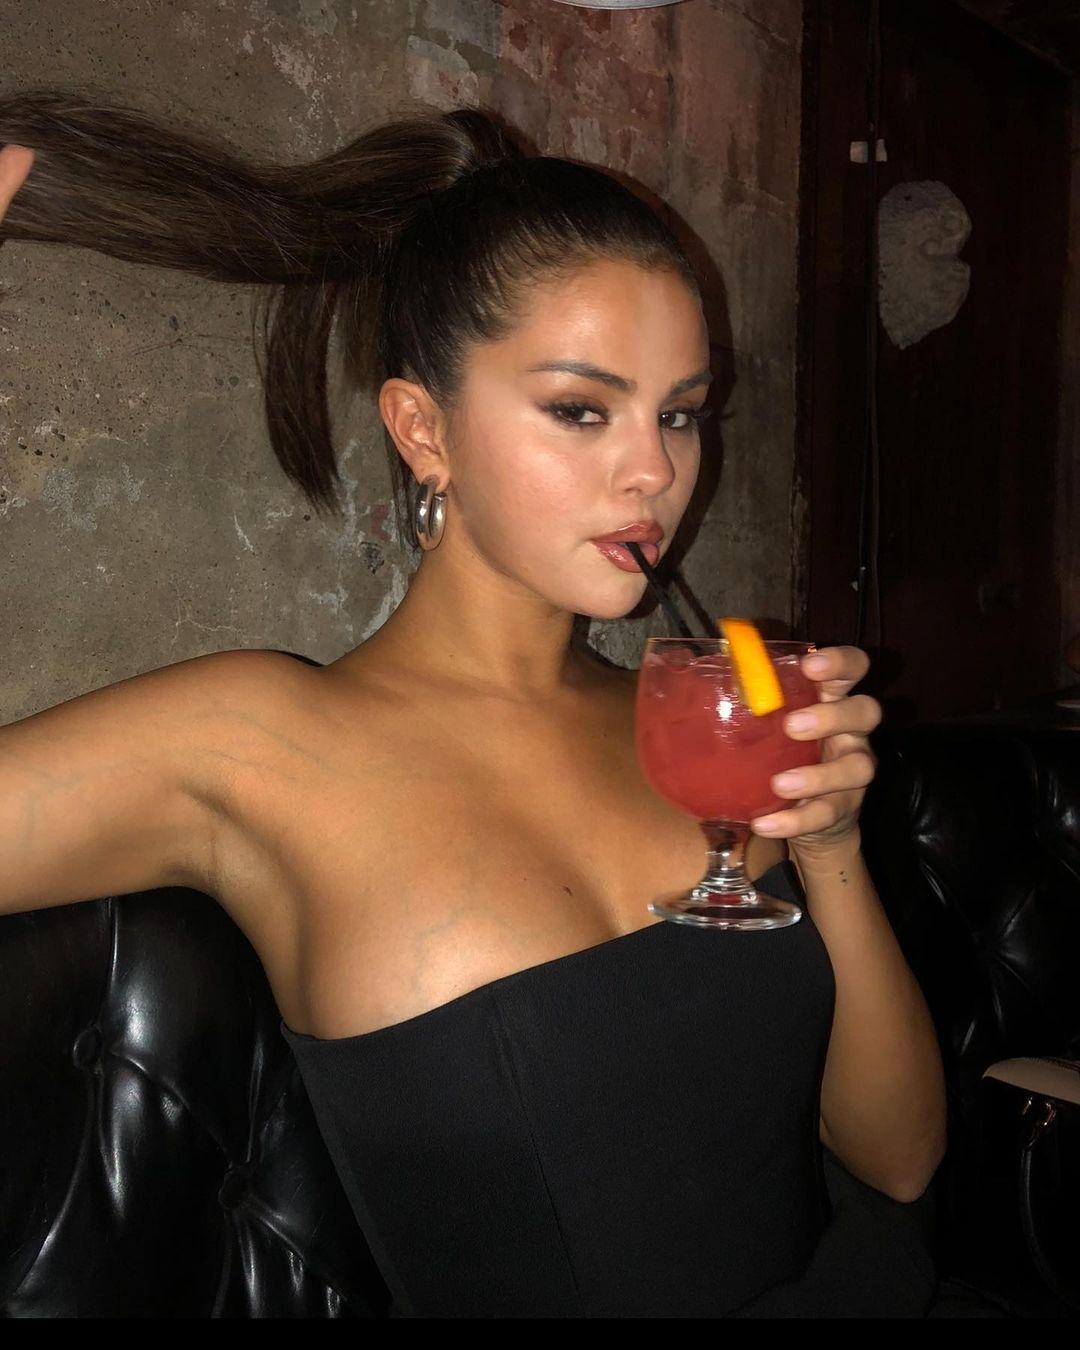 Selena Gomez shares sultry Throwback